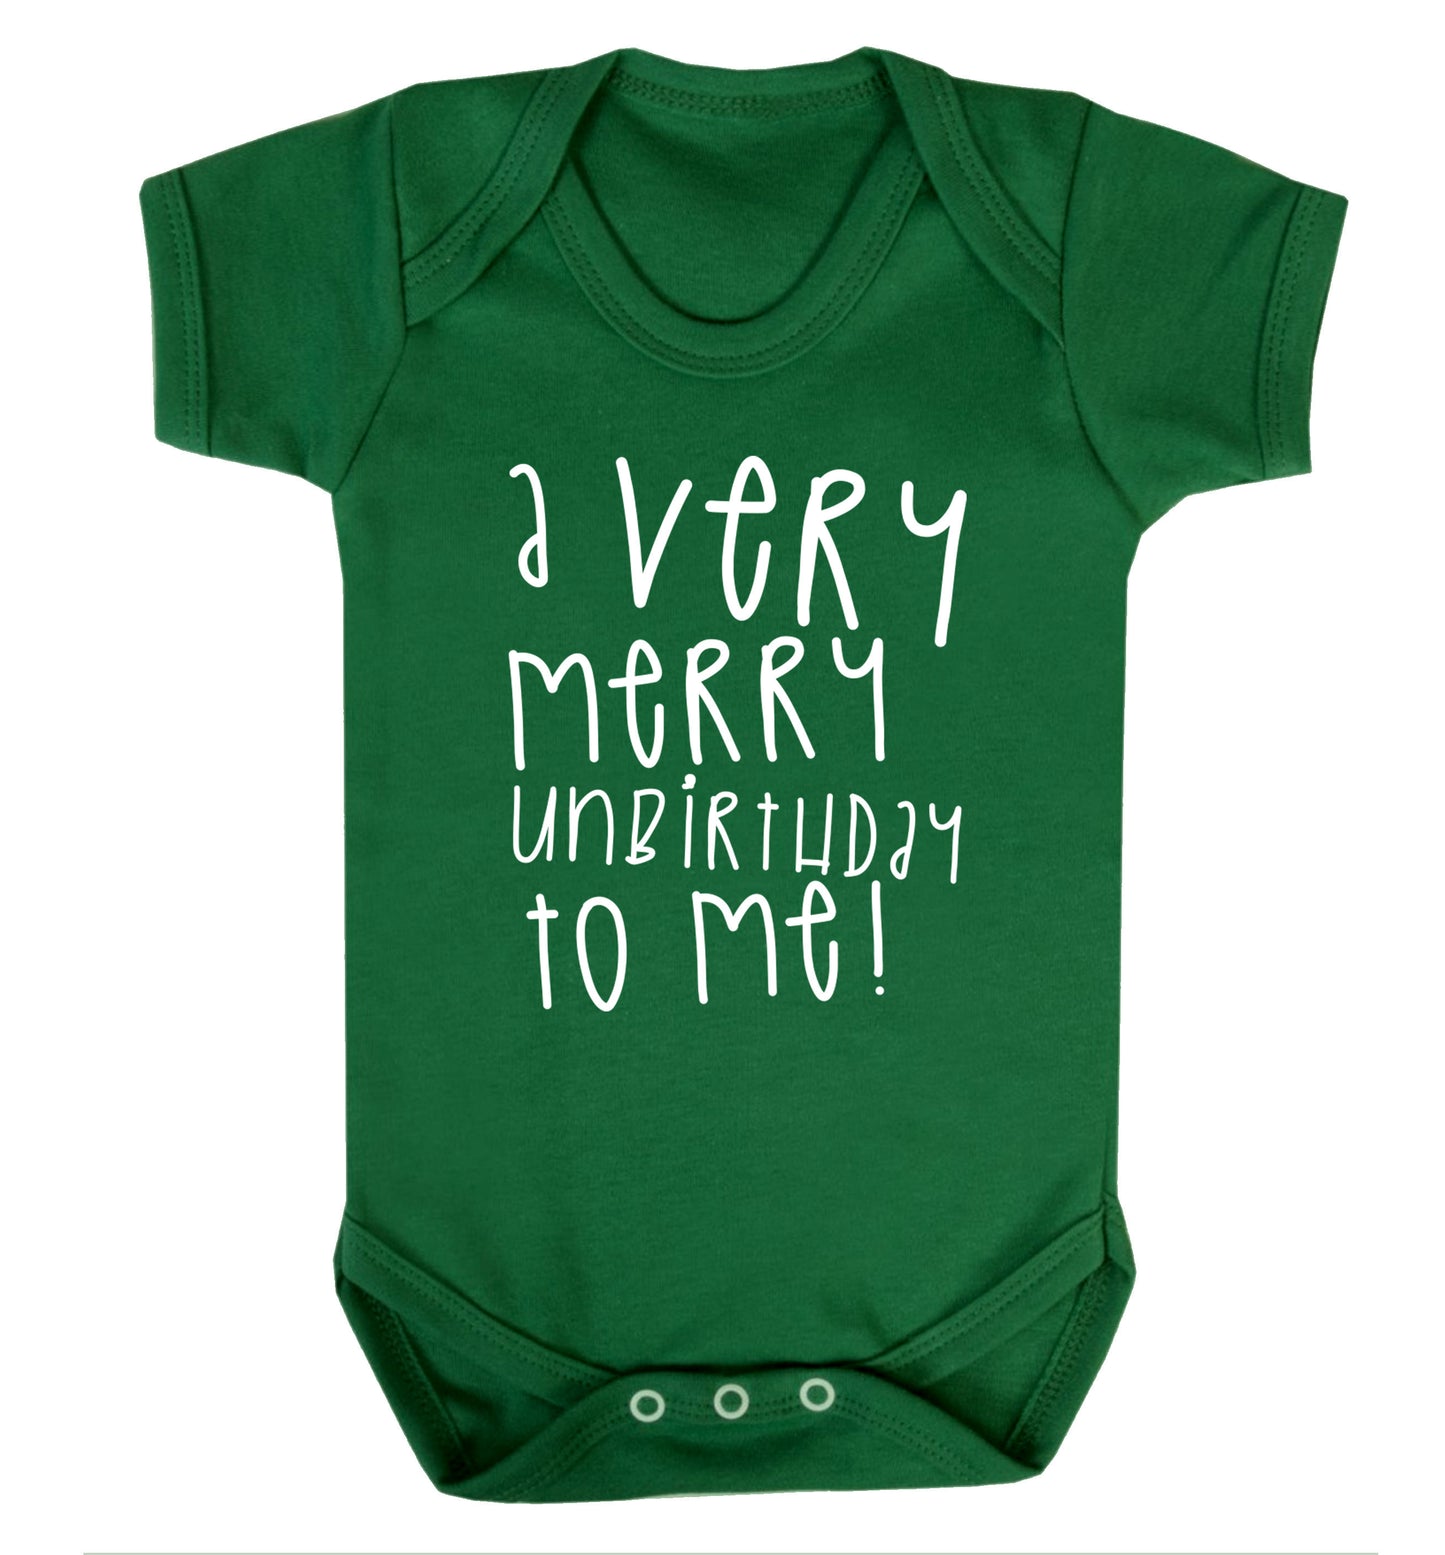 A very merry unbirthday to me! Baby Vest green 18-24 months